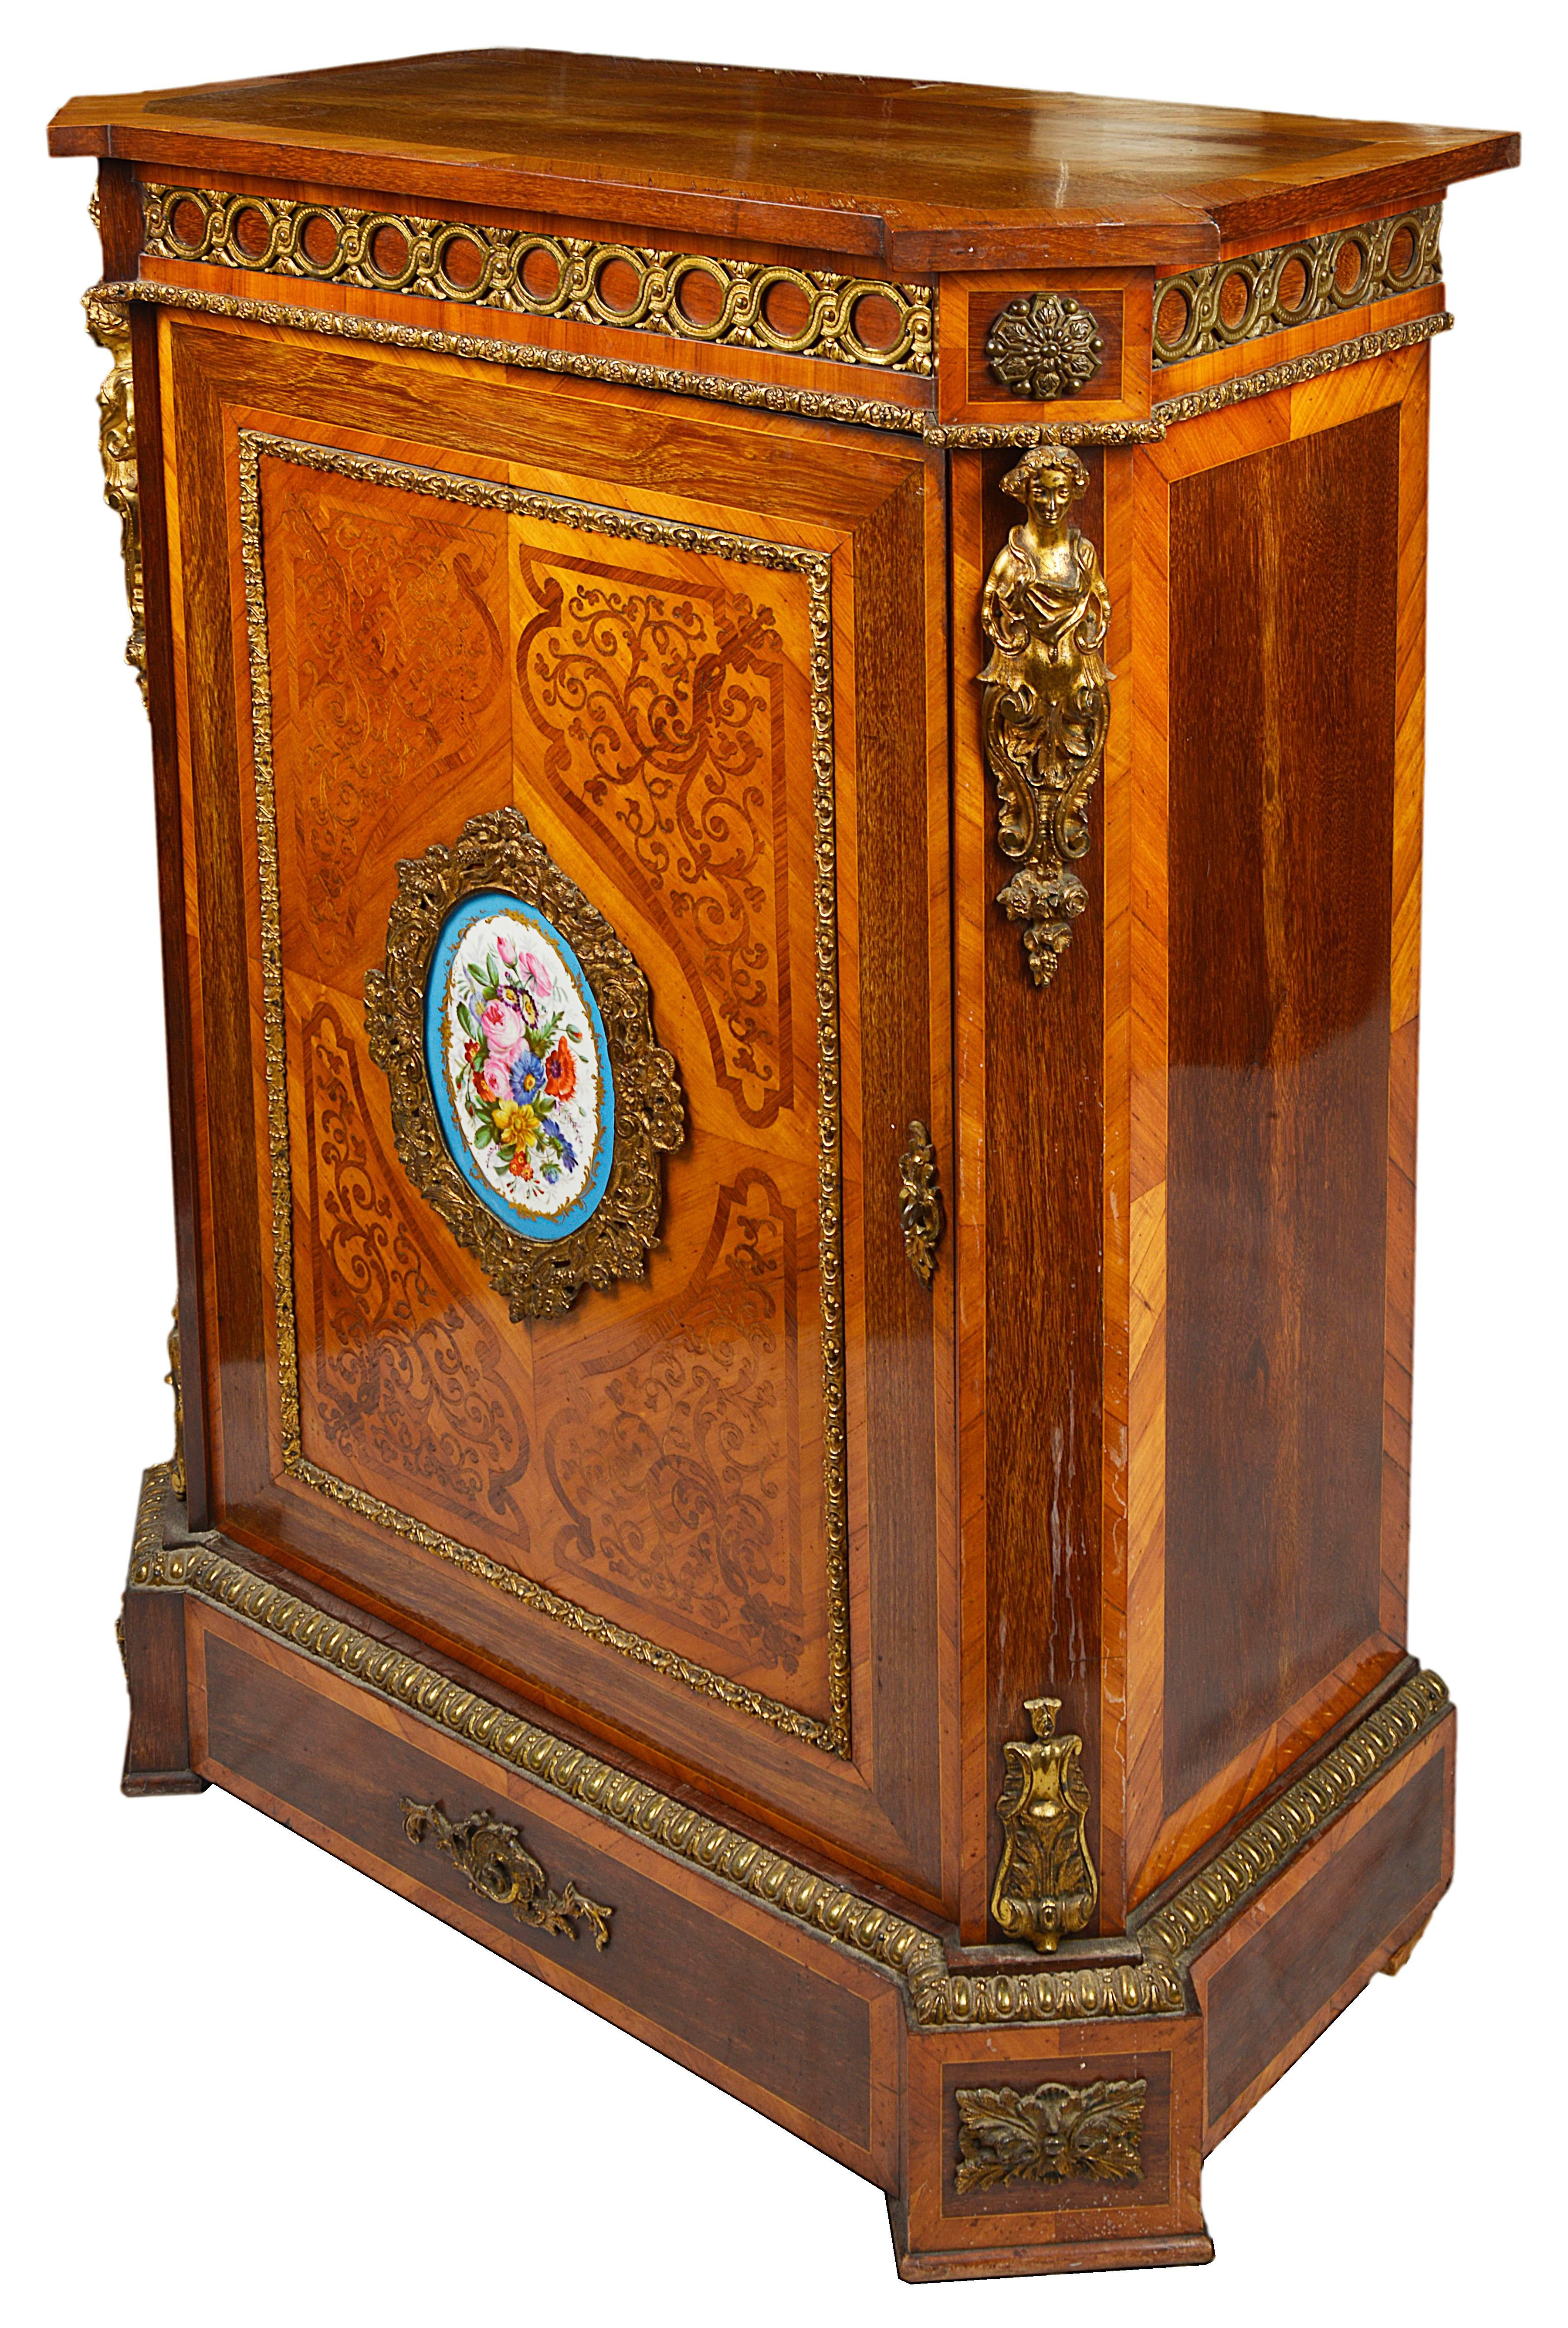 A fine quality 19th century seaweed marquetry inlaid Pier cabinet, having gilded ormolu mounts and a 'Sevres' porcelain plaque to the center of the door.
The door opening to reveal a single shelf within.